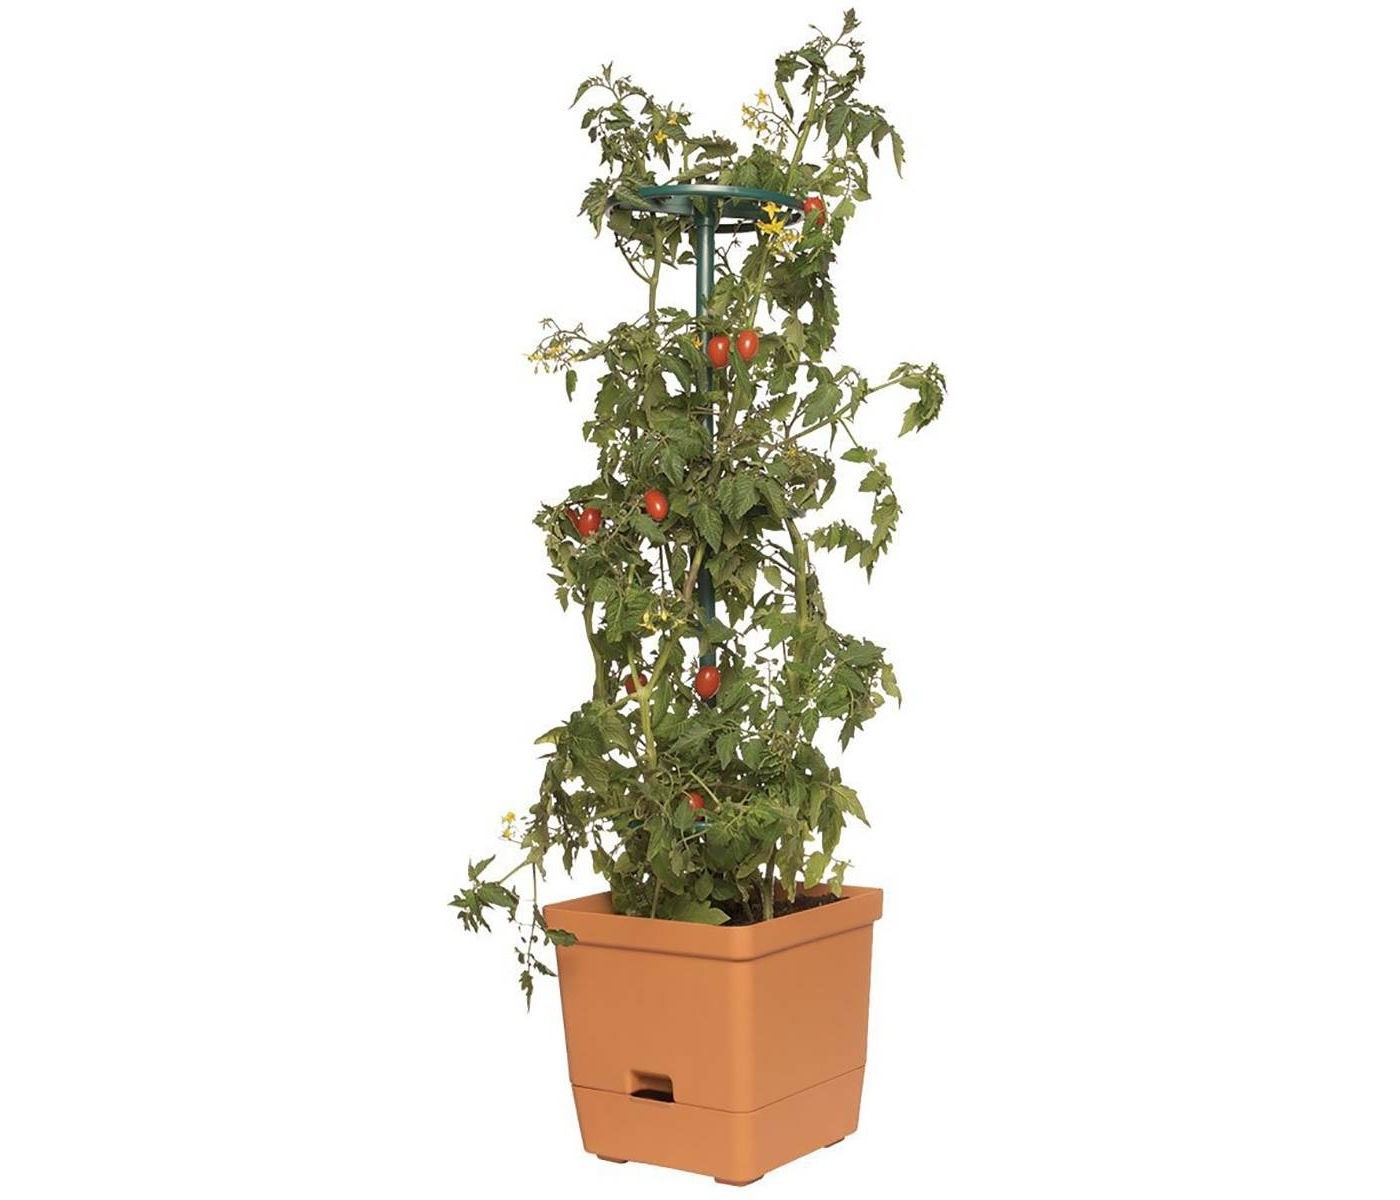 The planter with a tomato vine growing on it 